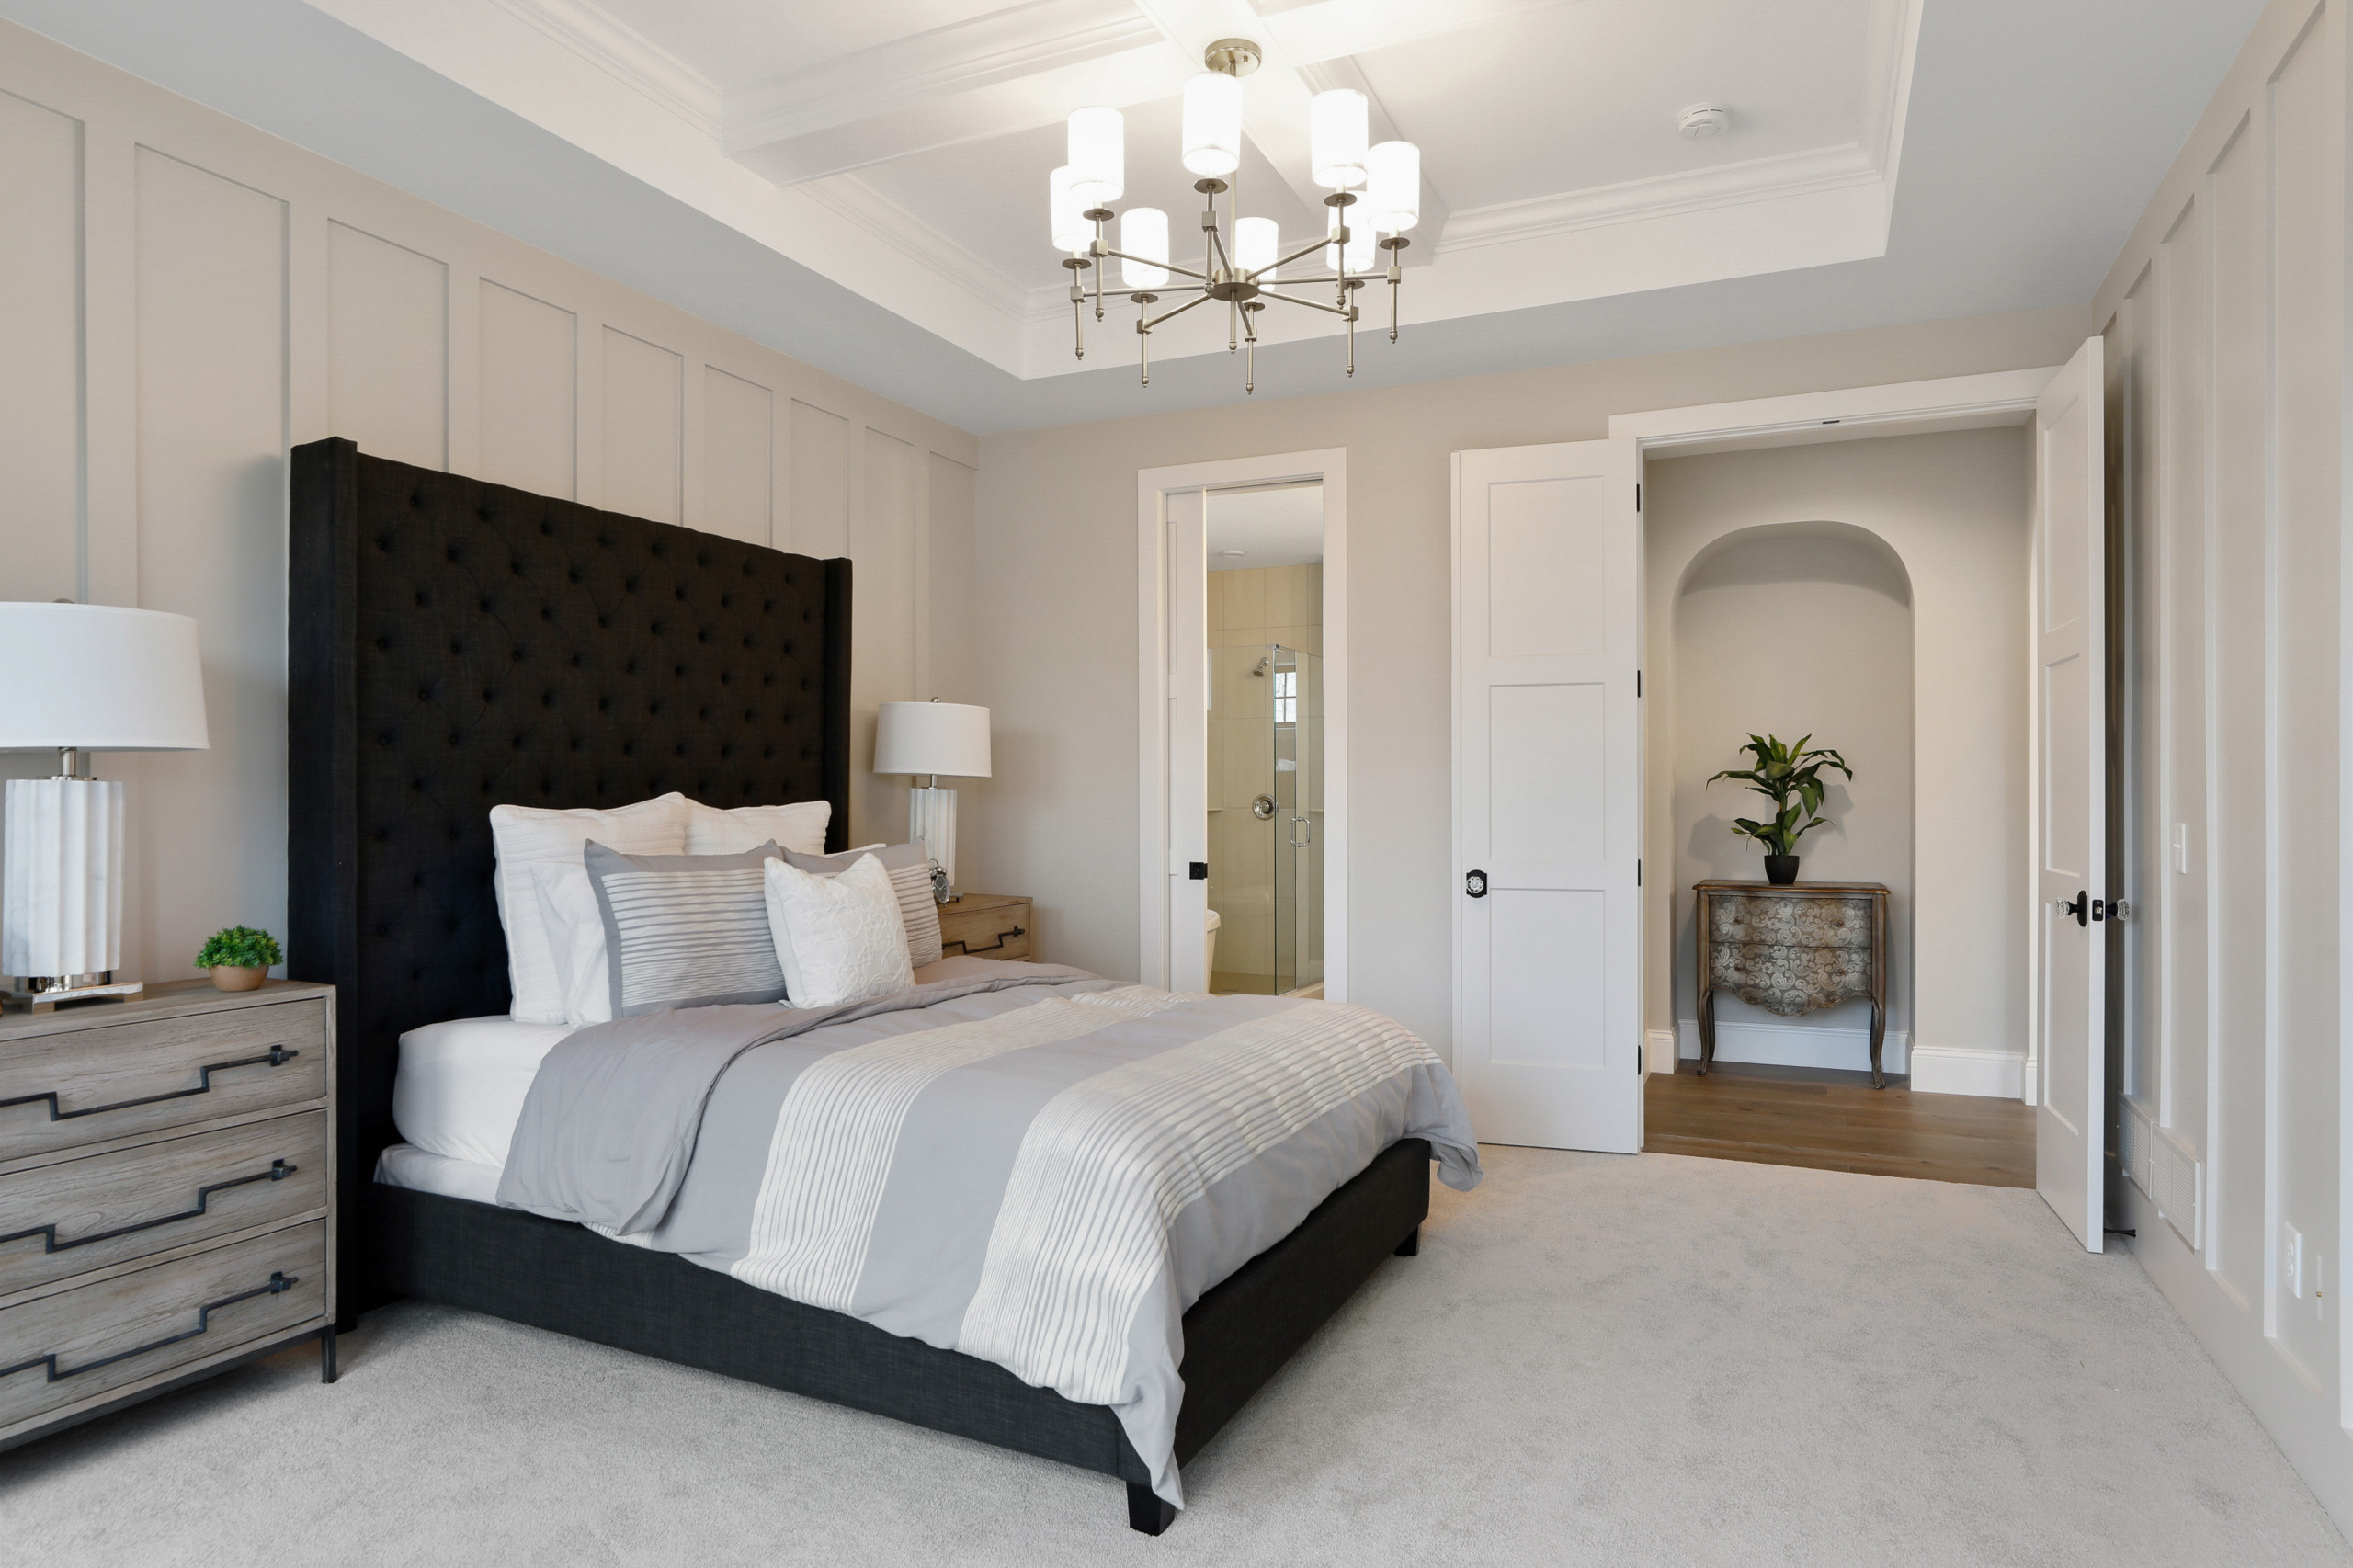 75 Wall Paneling Bedroom Ideas You'll Love - April, 2023 | Houzz